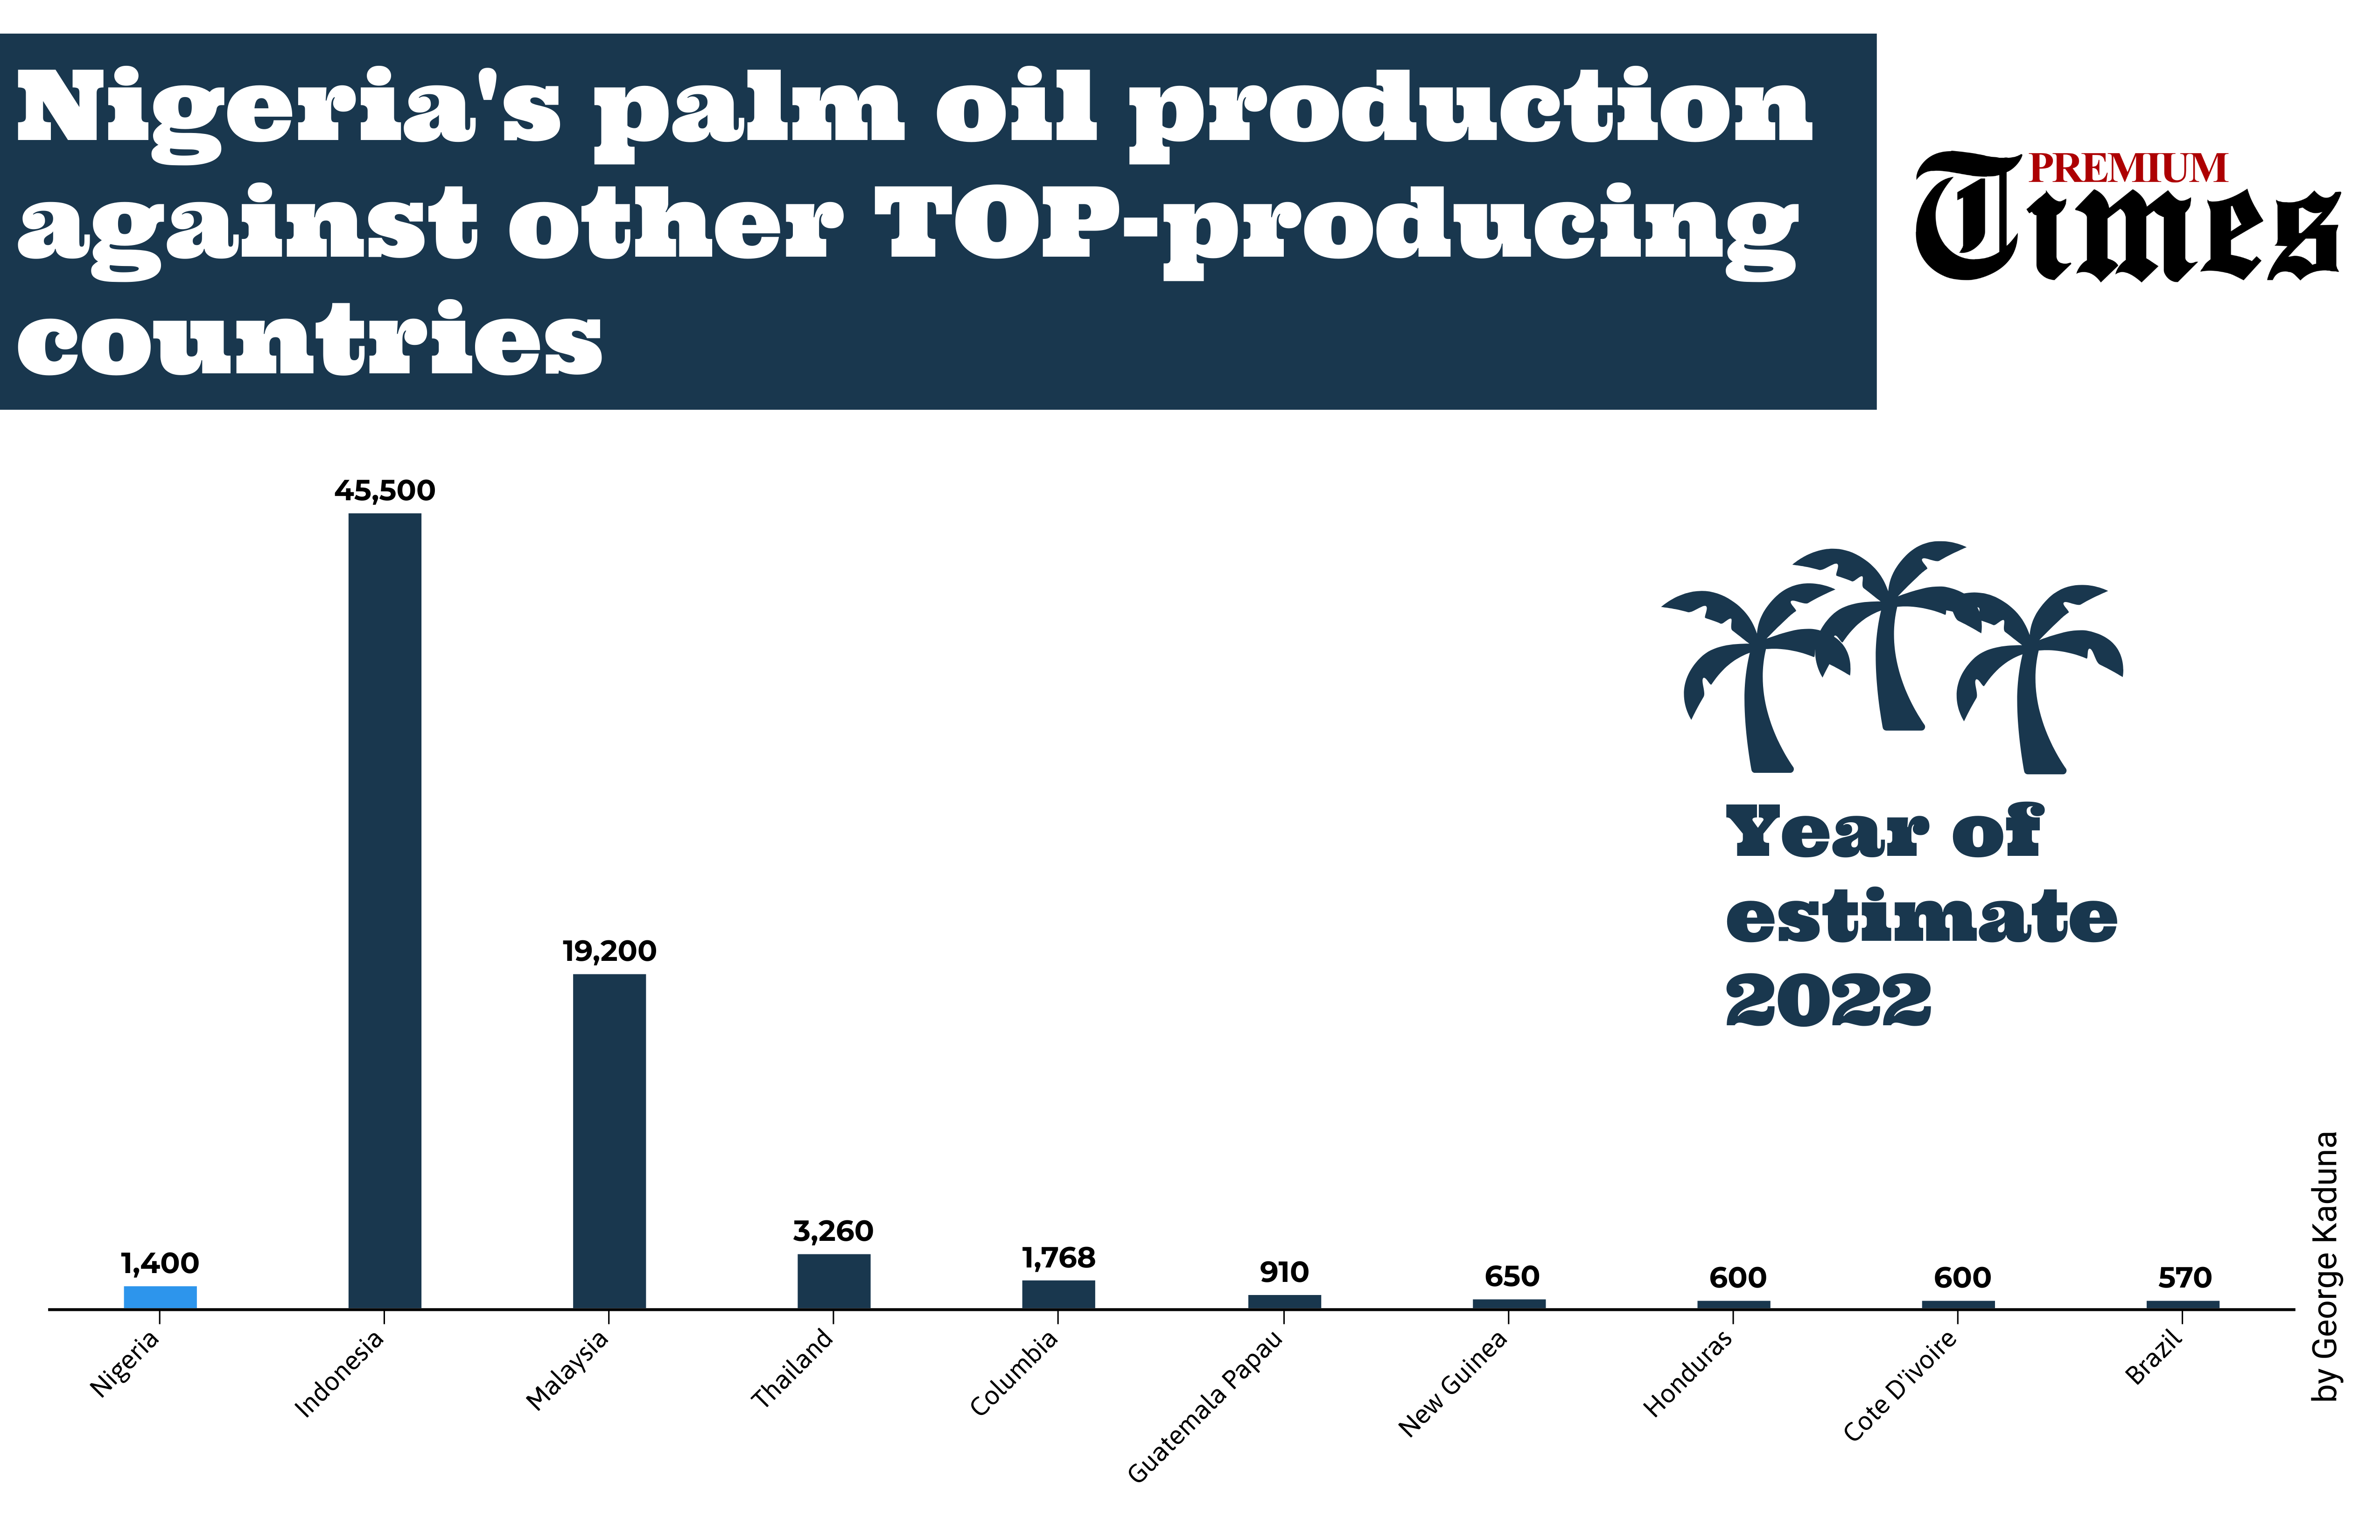 Nigeria’s production against other top-producing countries)